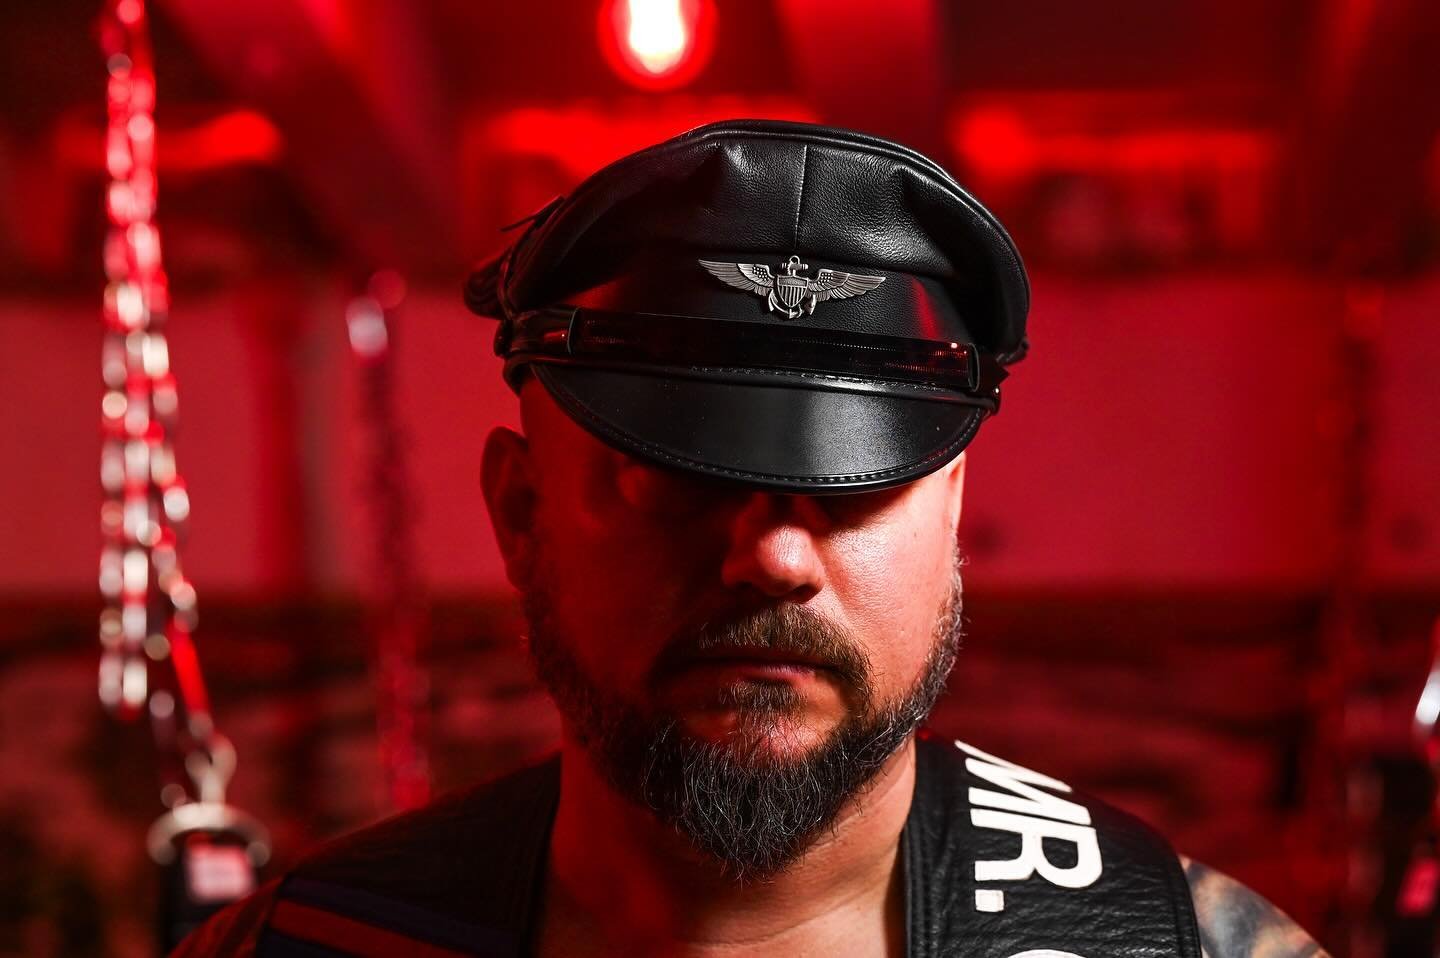 It&rsquo;s Muir Cap Monday! Hope ya&rsquo;ll have an awesome week ahead, let&rsquo;s make it a good one! 📸 by @chicagodudoir #muircapmonday🖤💙❤️ #muircaps #learhermenofinstagram #leathercommunity #leatherfamily